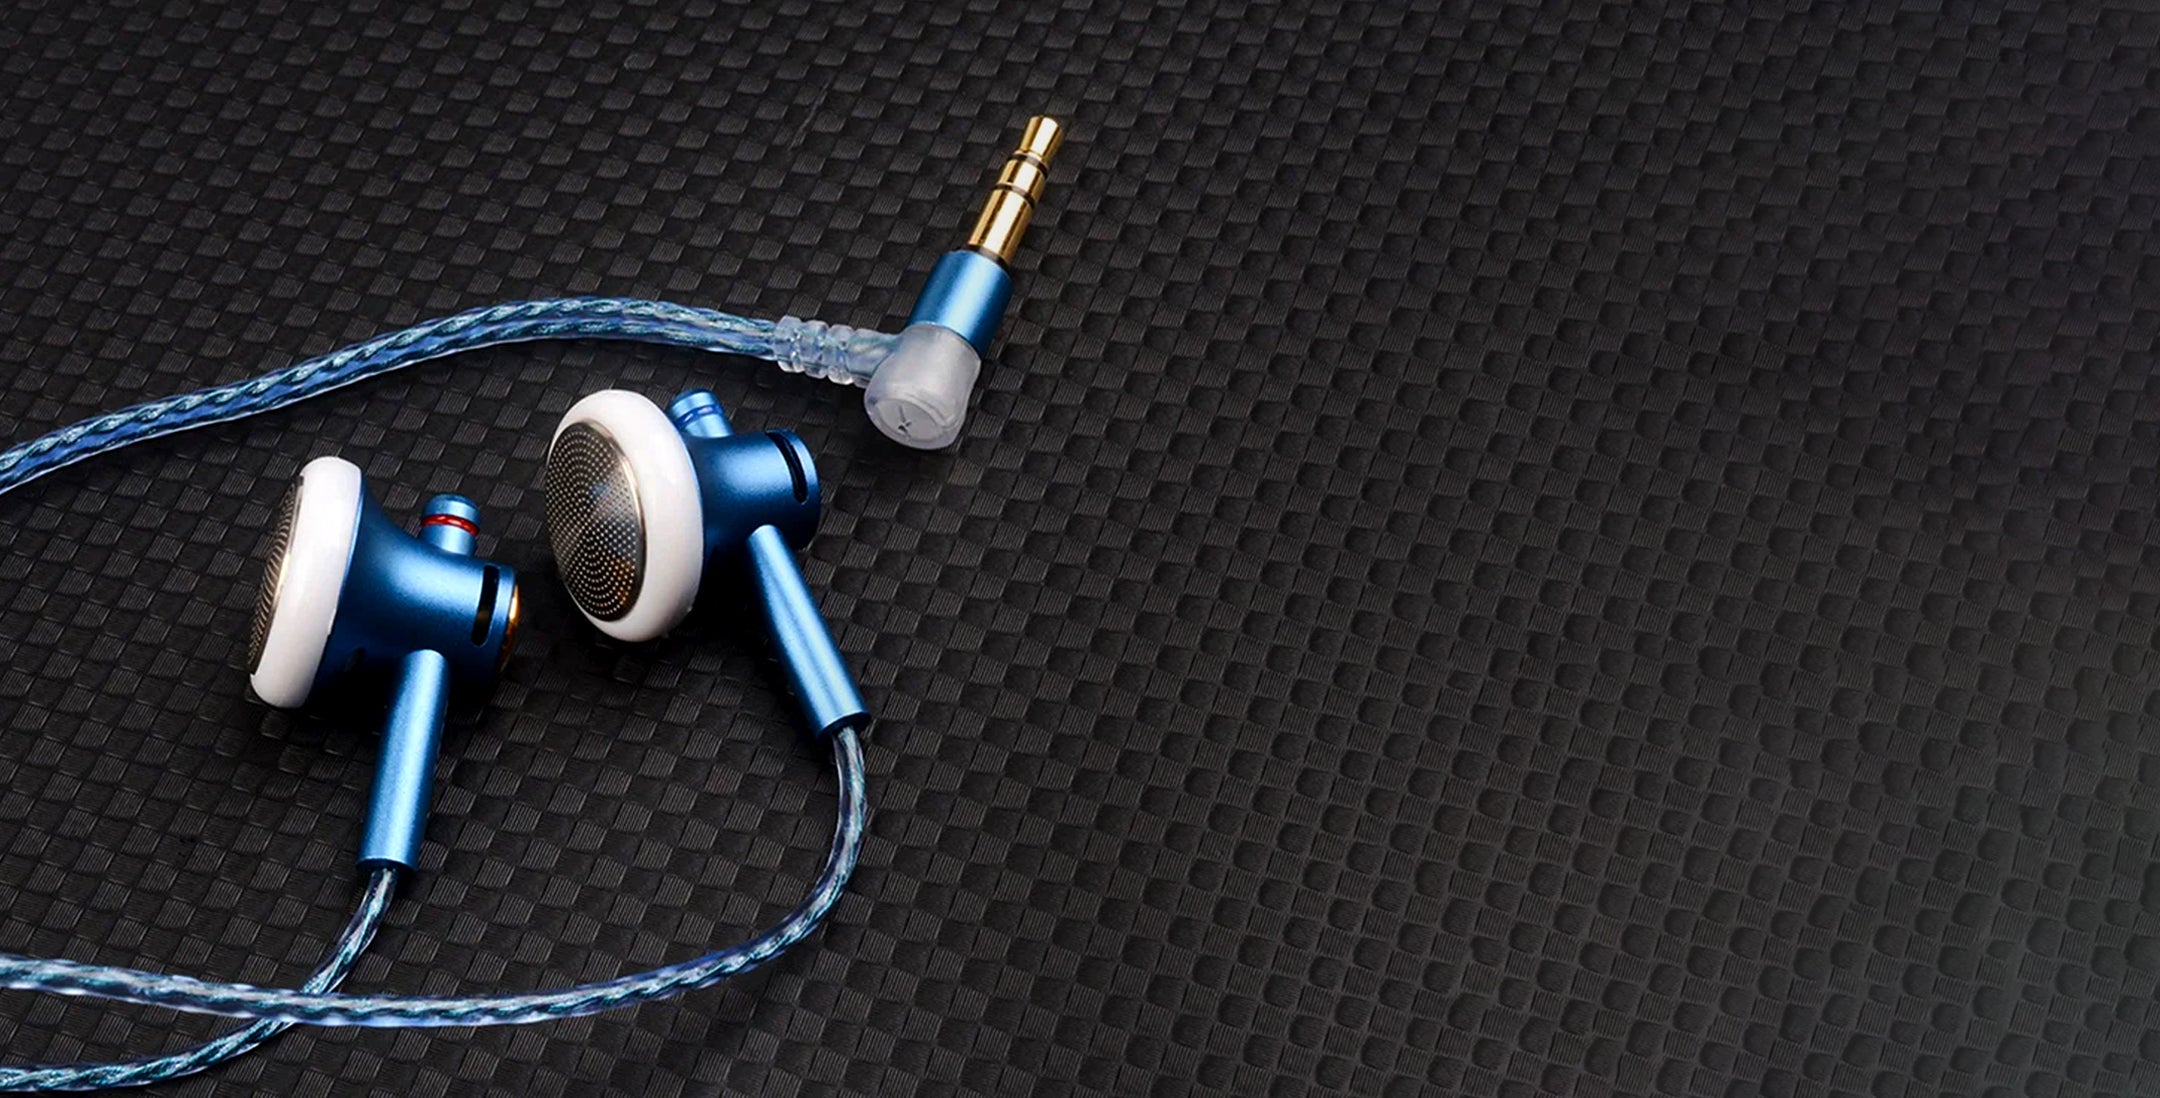 Concept kart nicehck eb2s pro wired earbuds blue 2  1